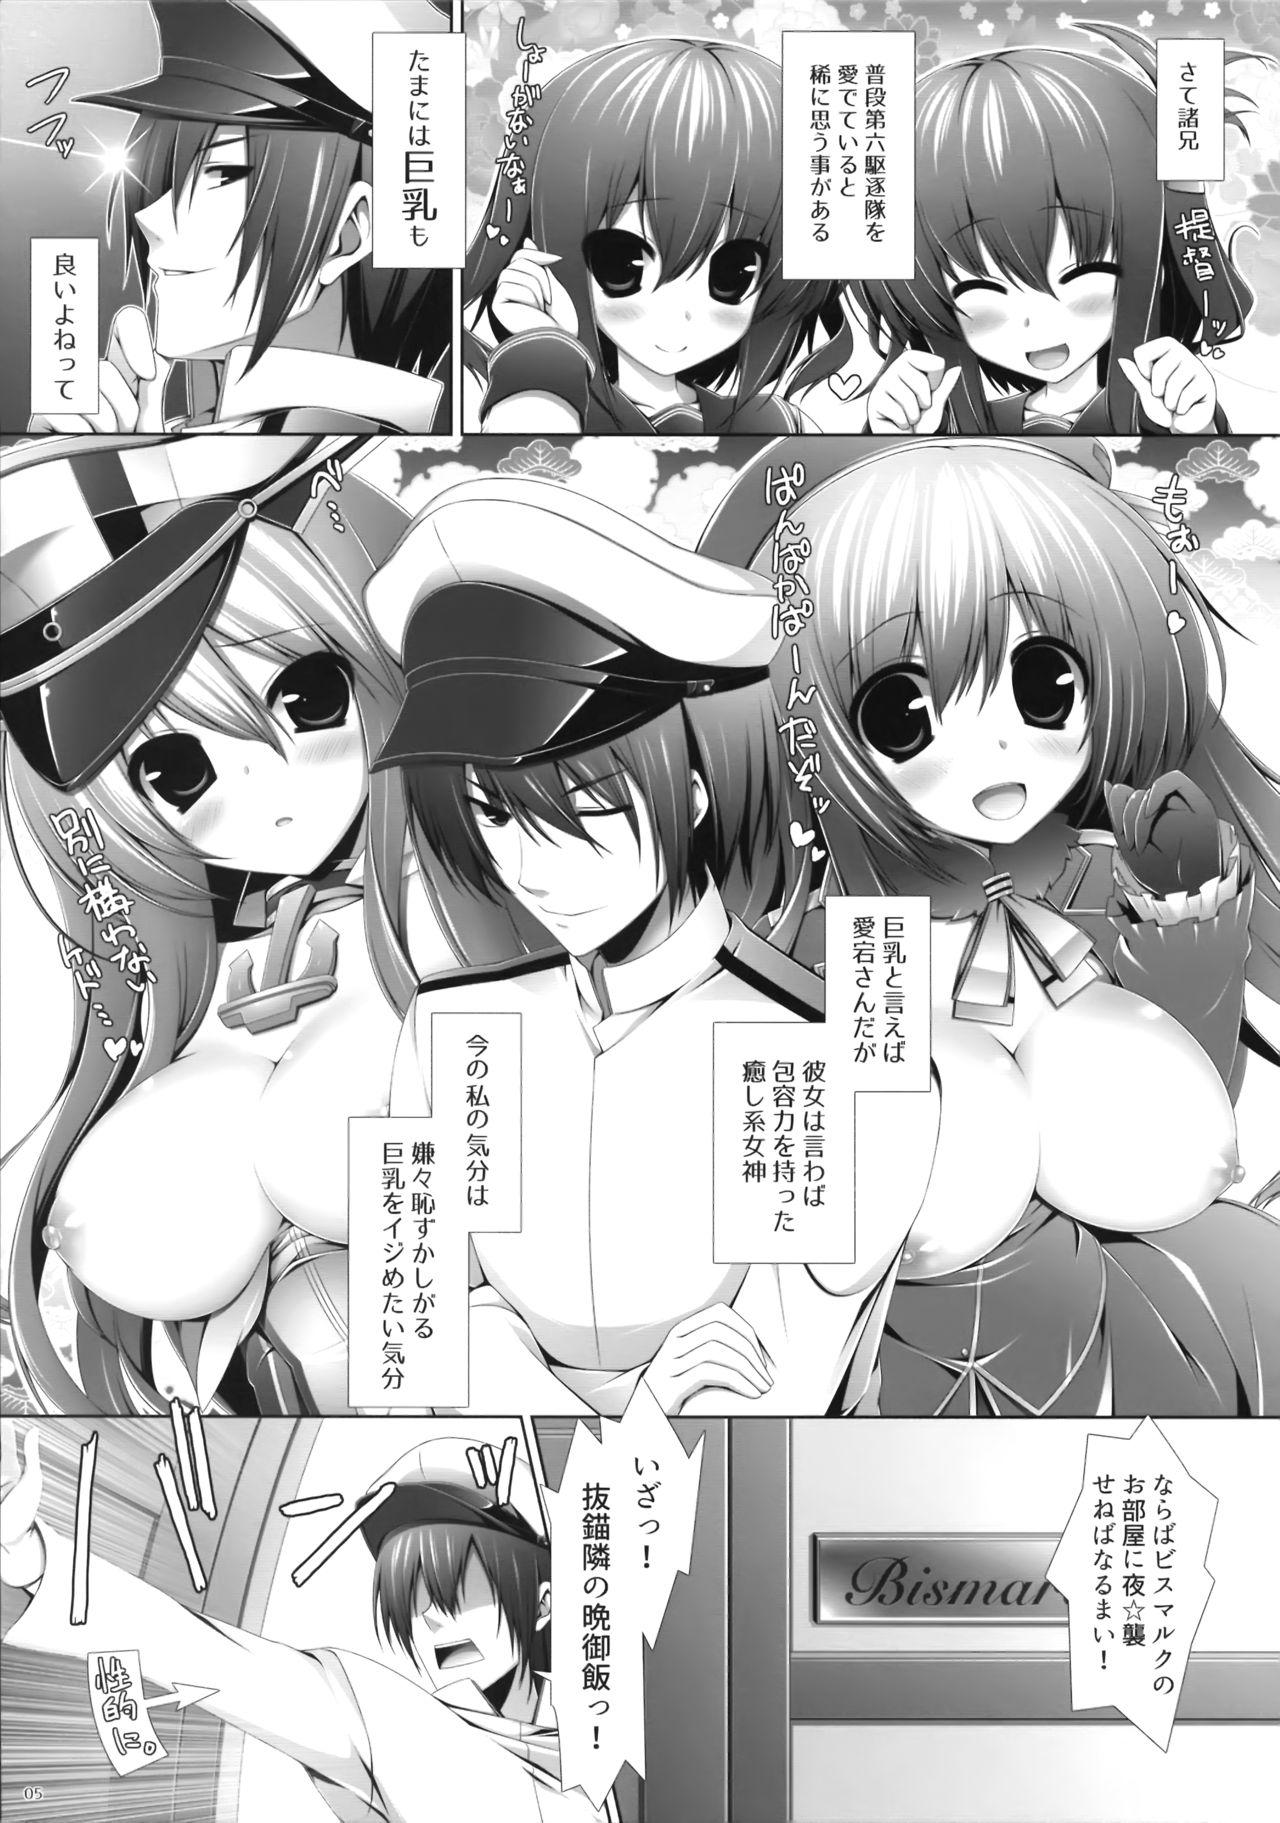 Hot Cunt Night battle ship girls - Kantai collection Old Vs Young - Page 4